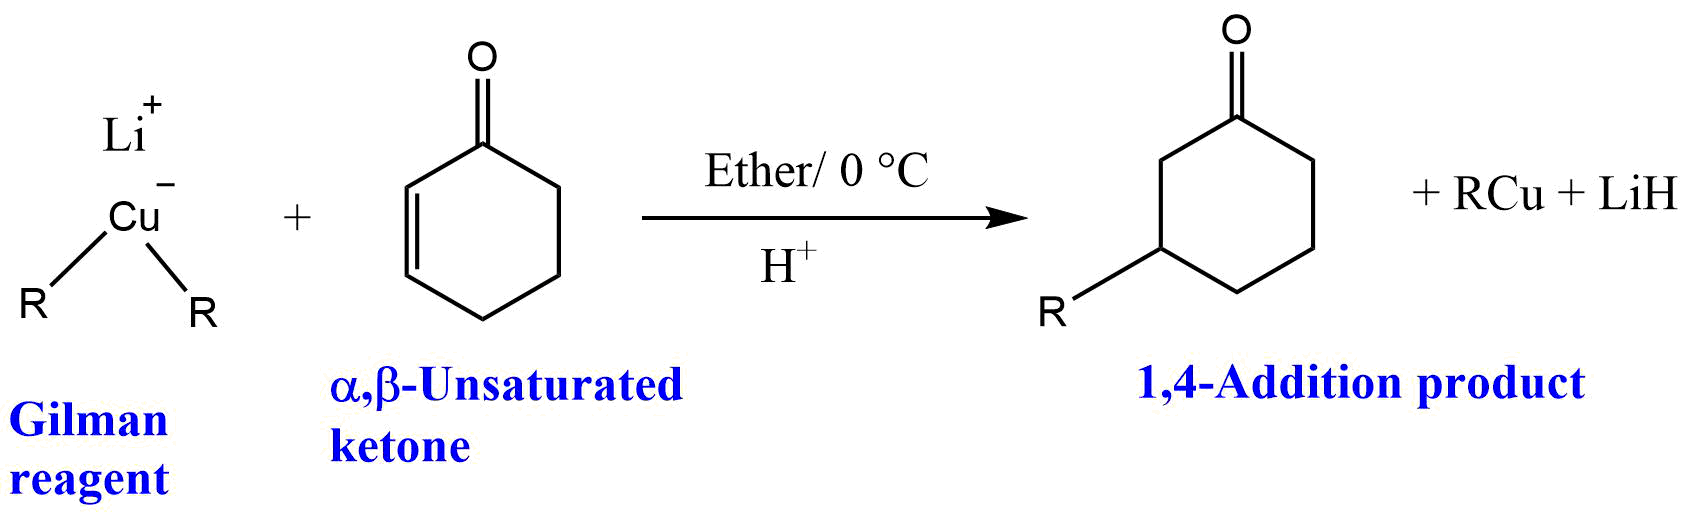 Reaction of Gilman reagent with α,β-unsaturated ketones